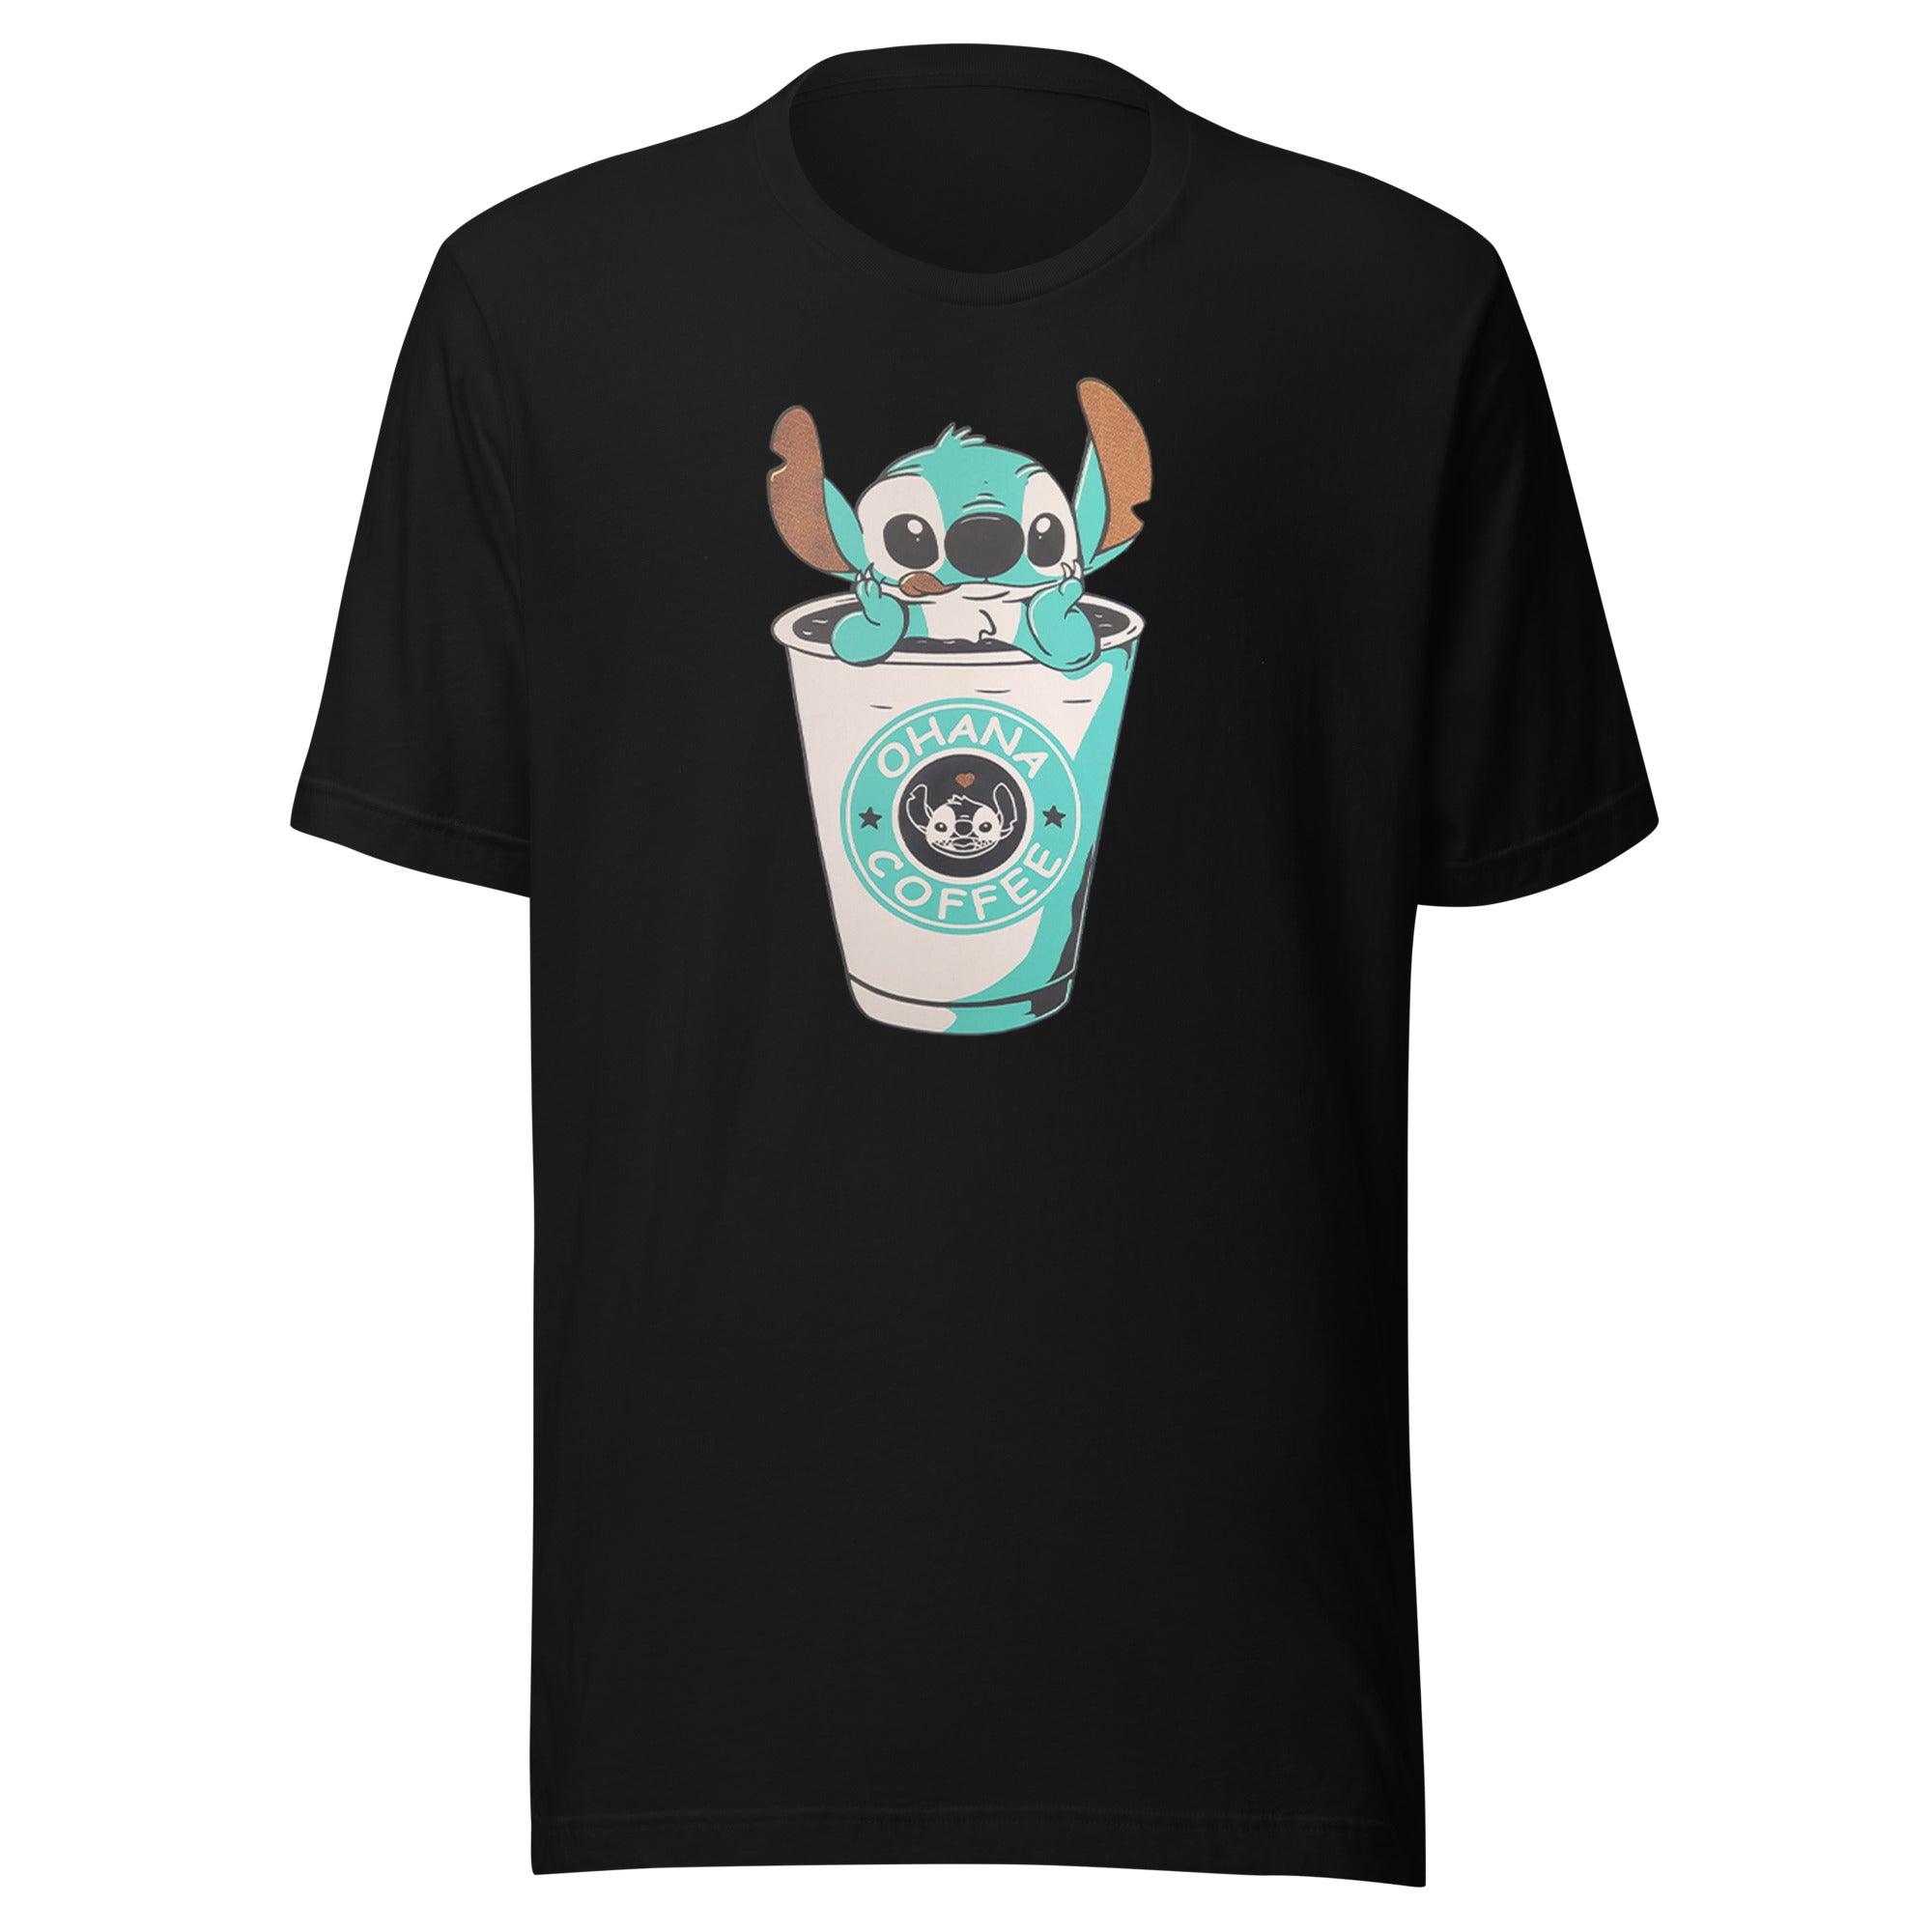 Stitch Ohana T-shirt in Coffee Cup Short Sleeve Unisex Top